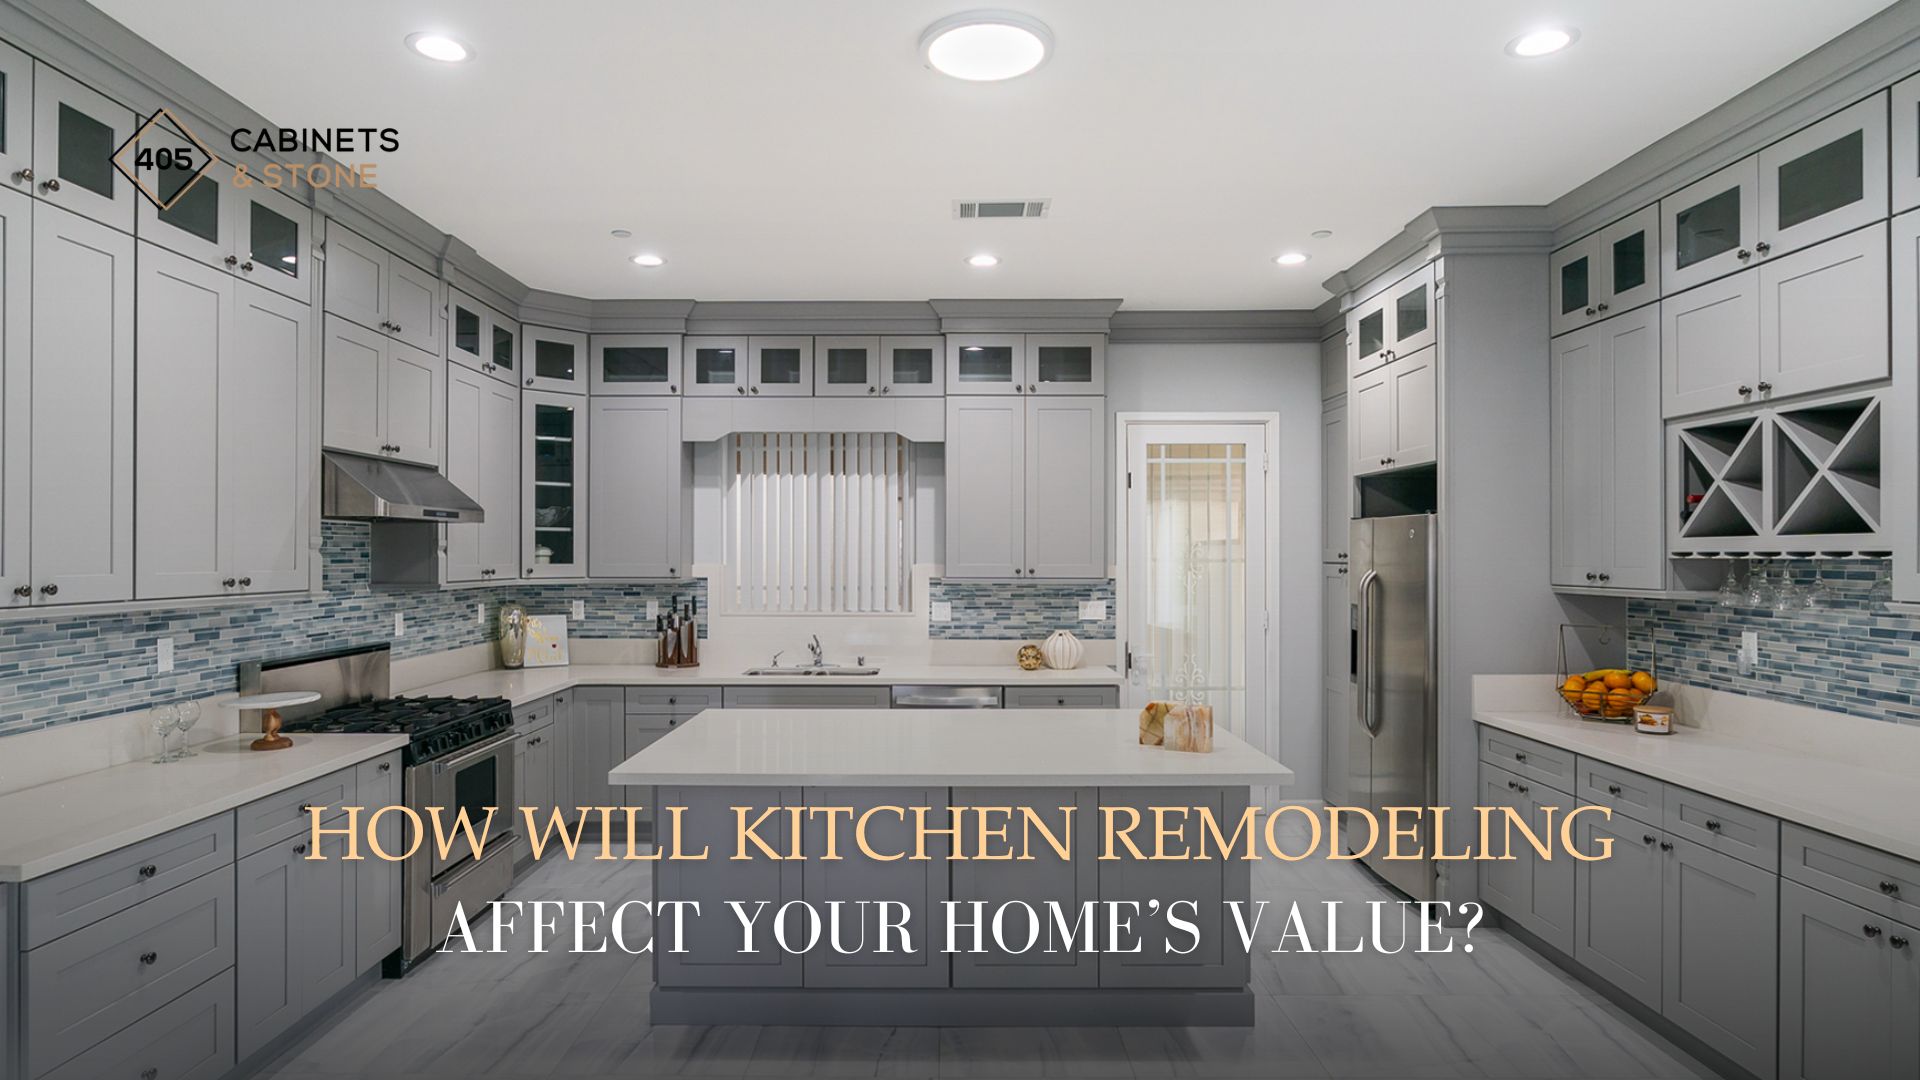 How Will Kitchen Remodeling Affect Your Home’s Value?